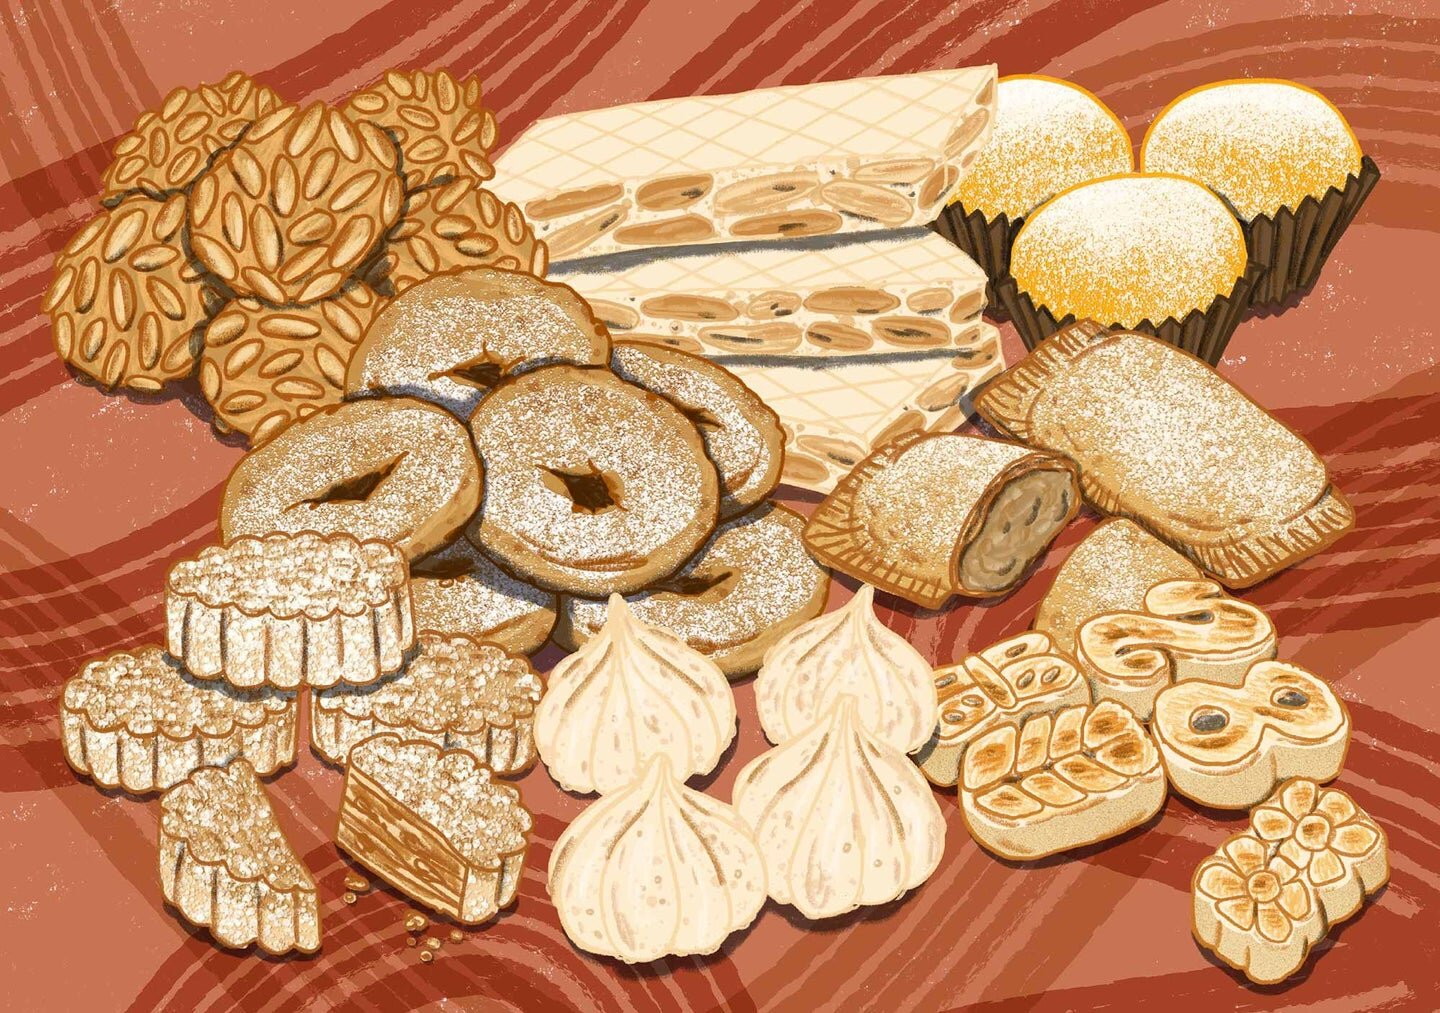 SAVEUR: A Field Guide to Spain’s Great Cookies